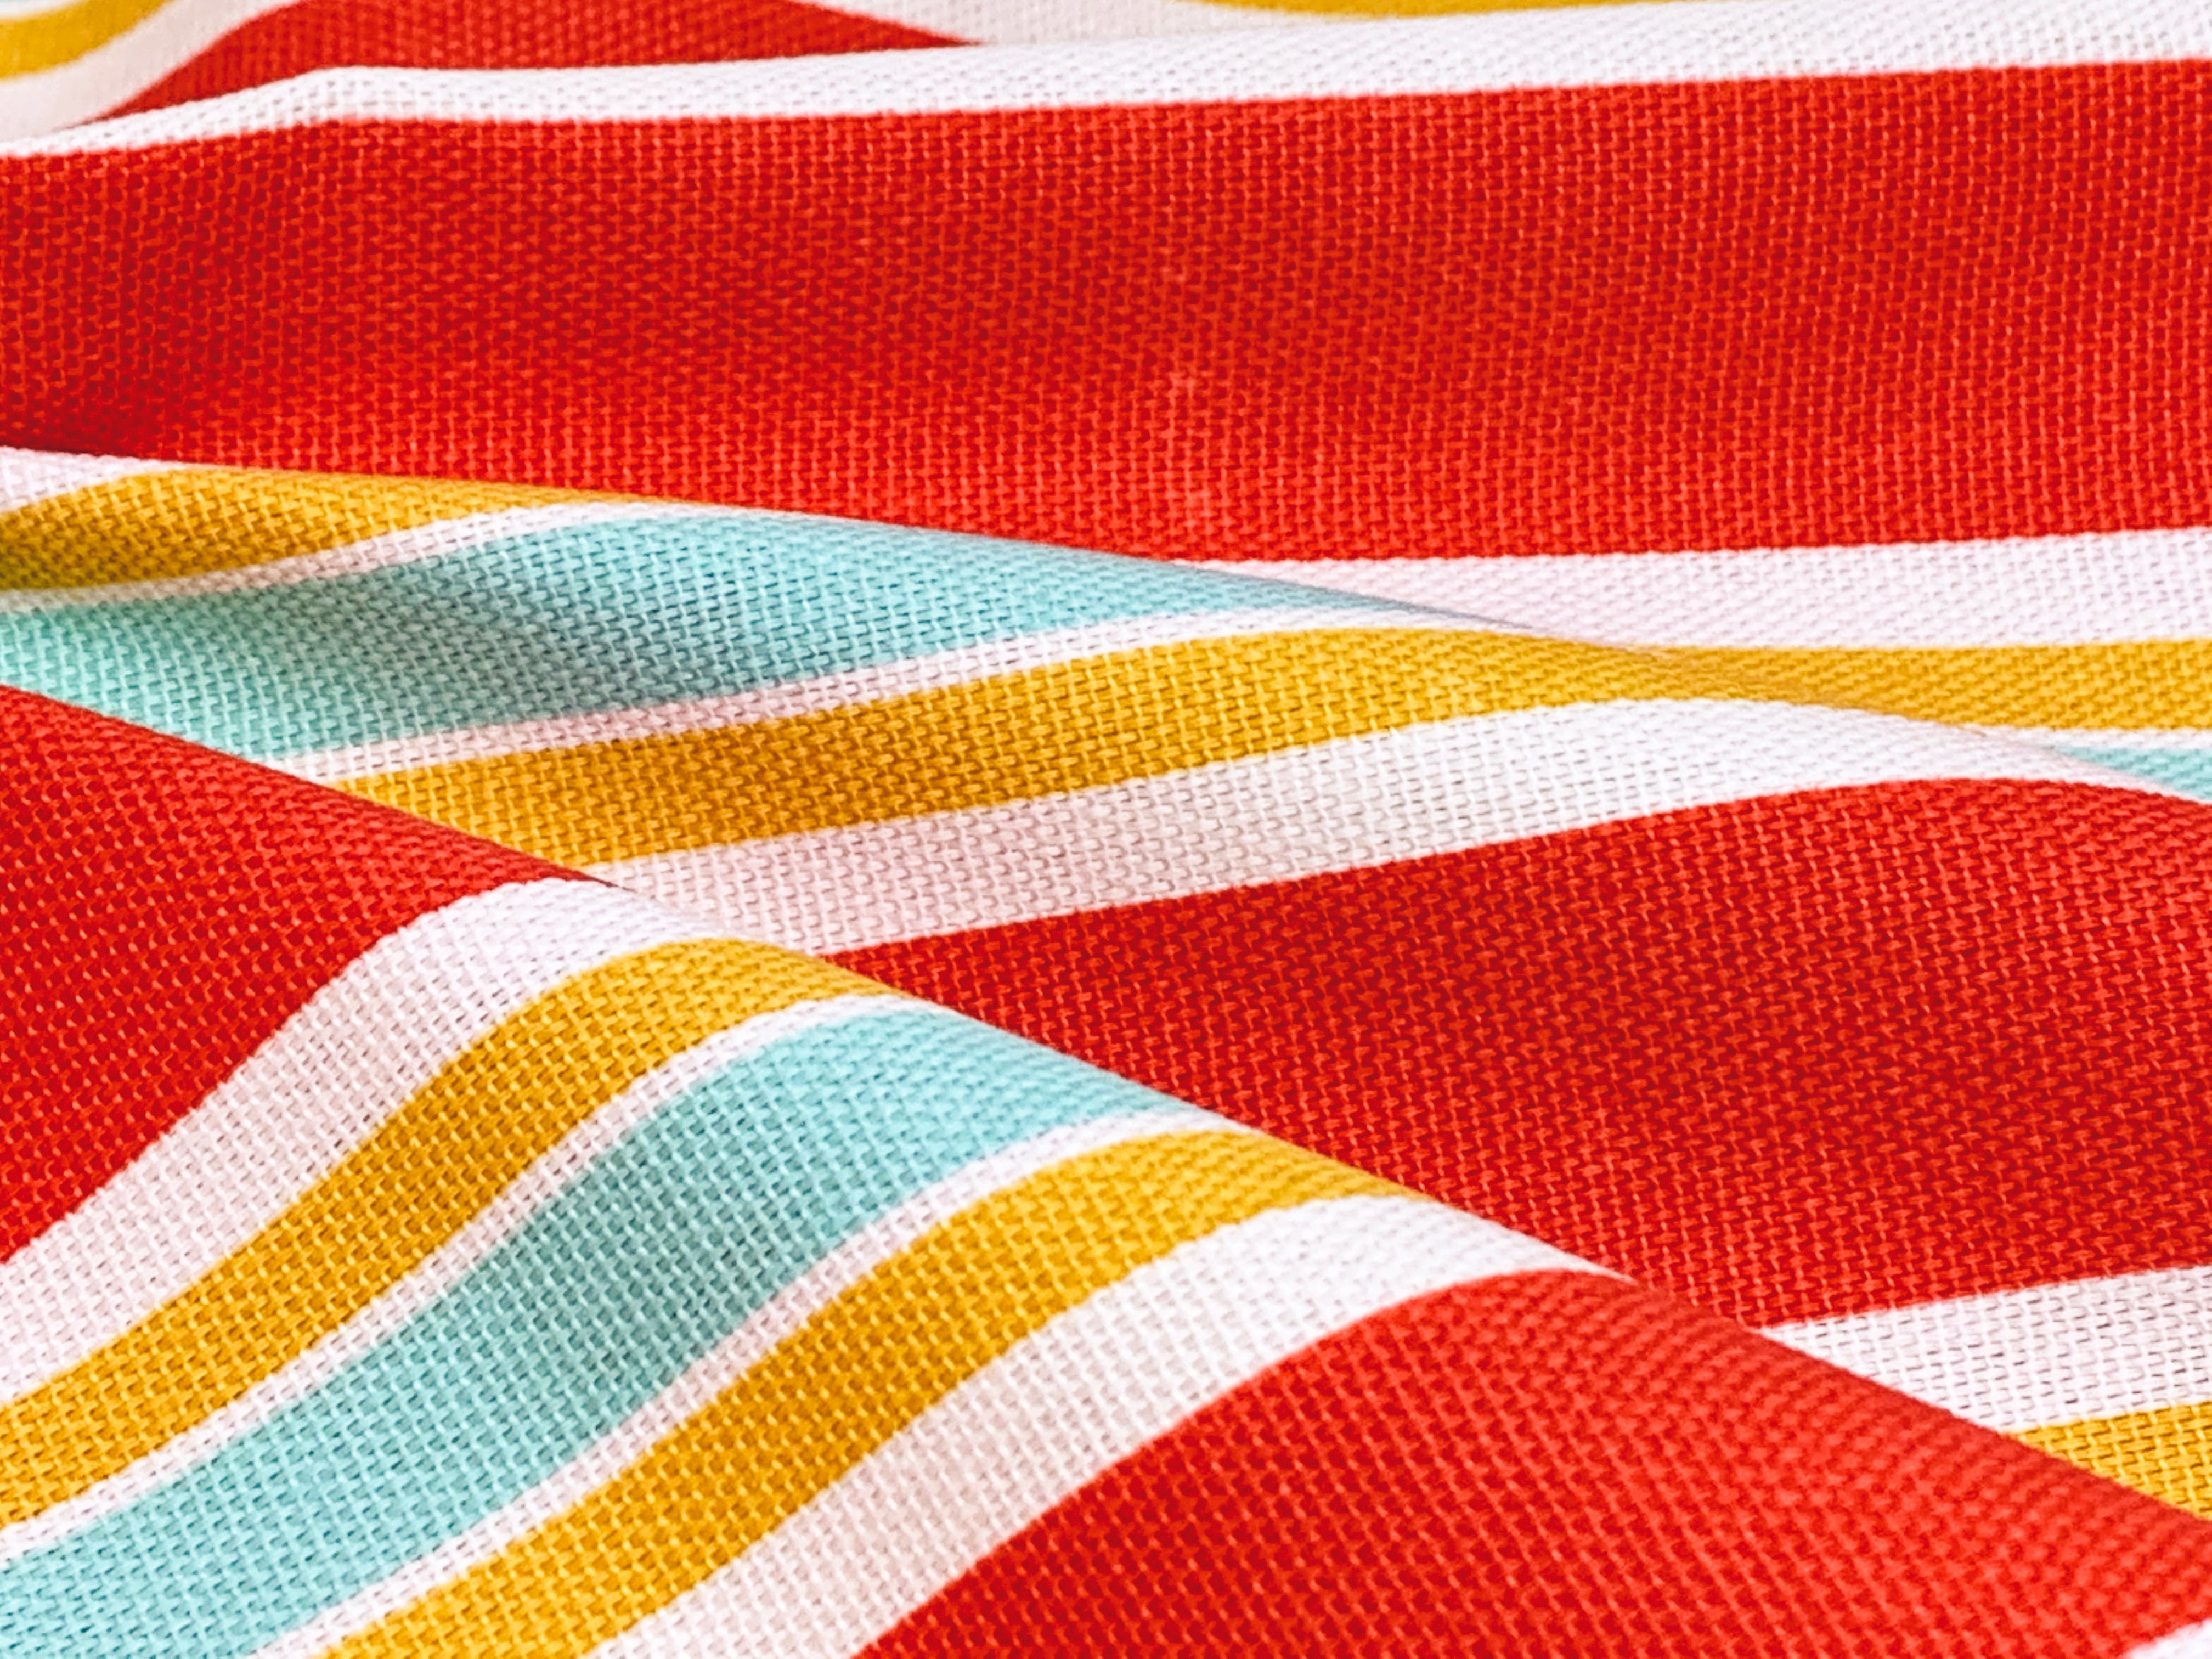 Waverly Inspirations 100% Cotton Duck 45" Width Large Stripe Print Sun Color Sewing Fabric by the Yard